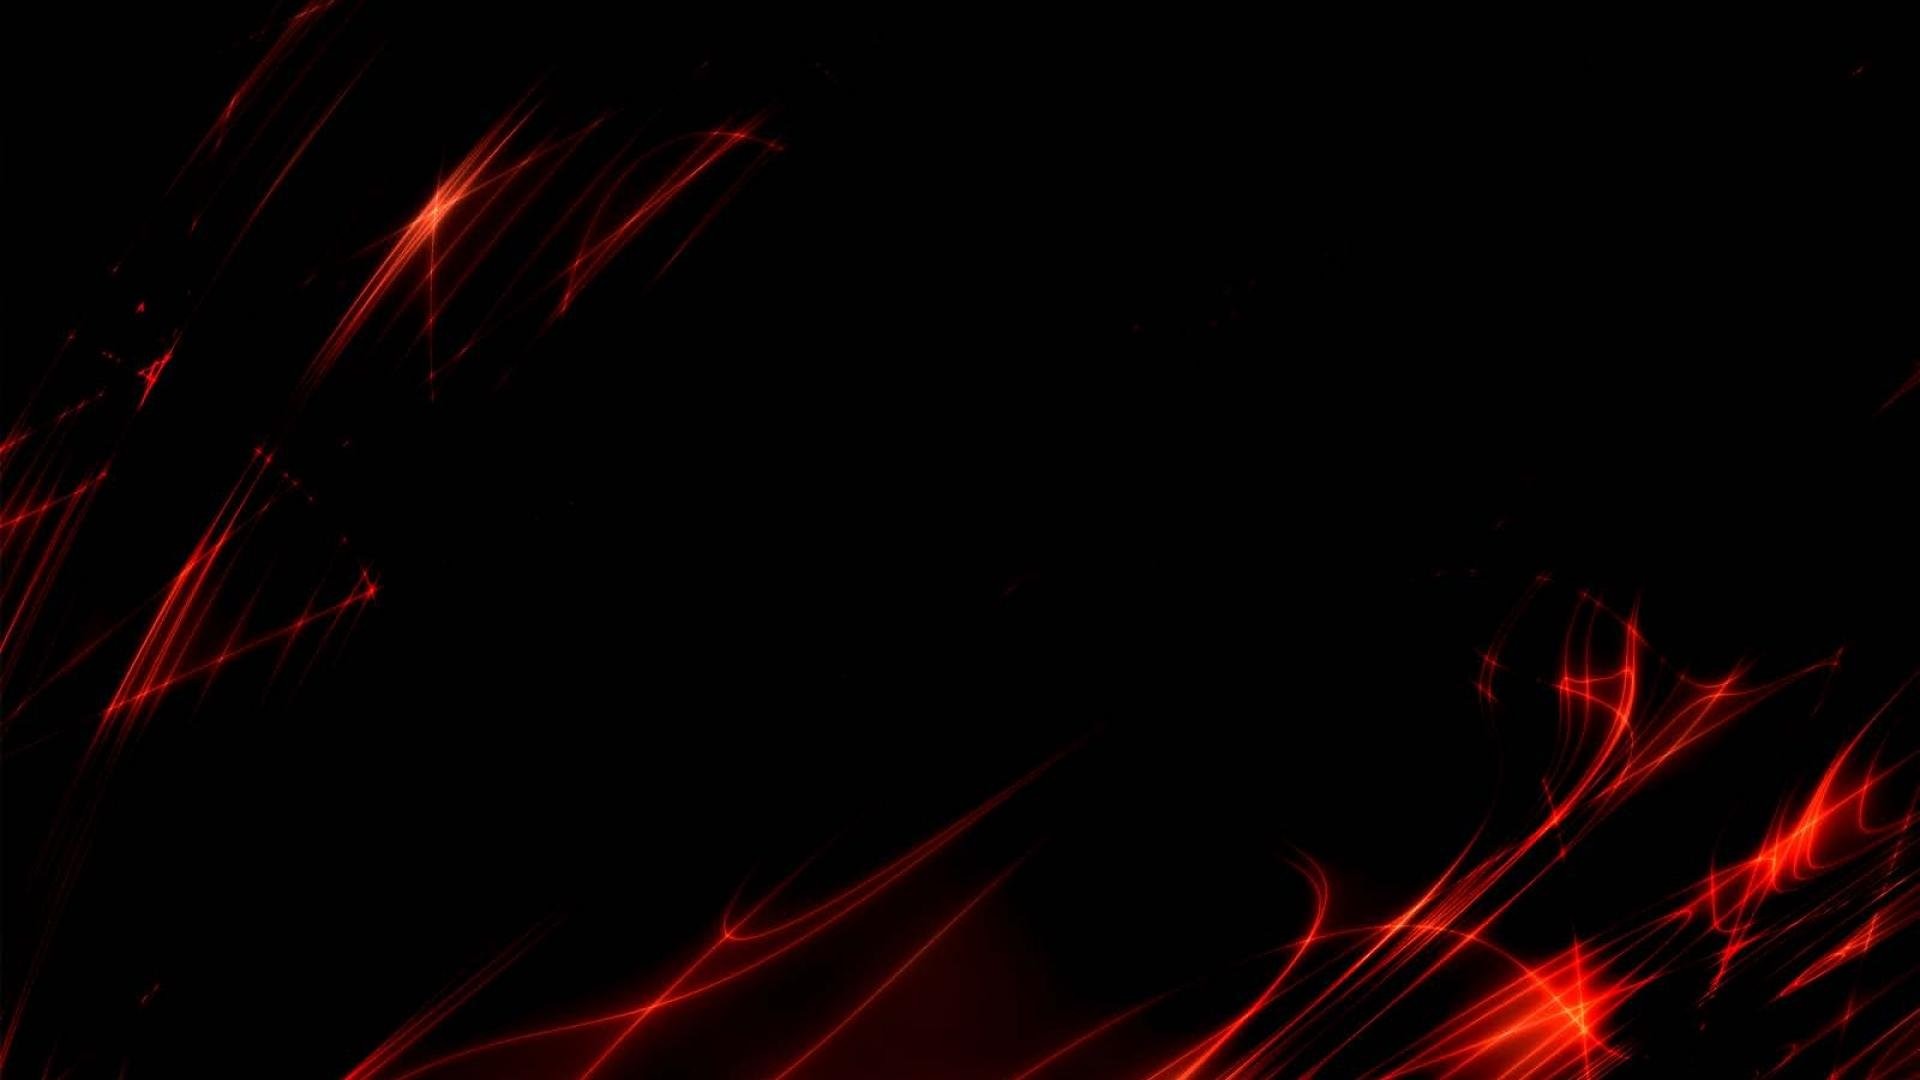 1920x1080 Dark Red Abstract Wallpaper, Dark Red Abstract Pics for .